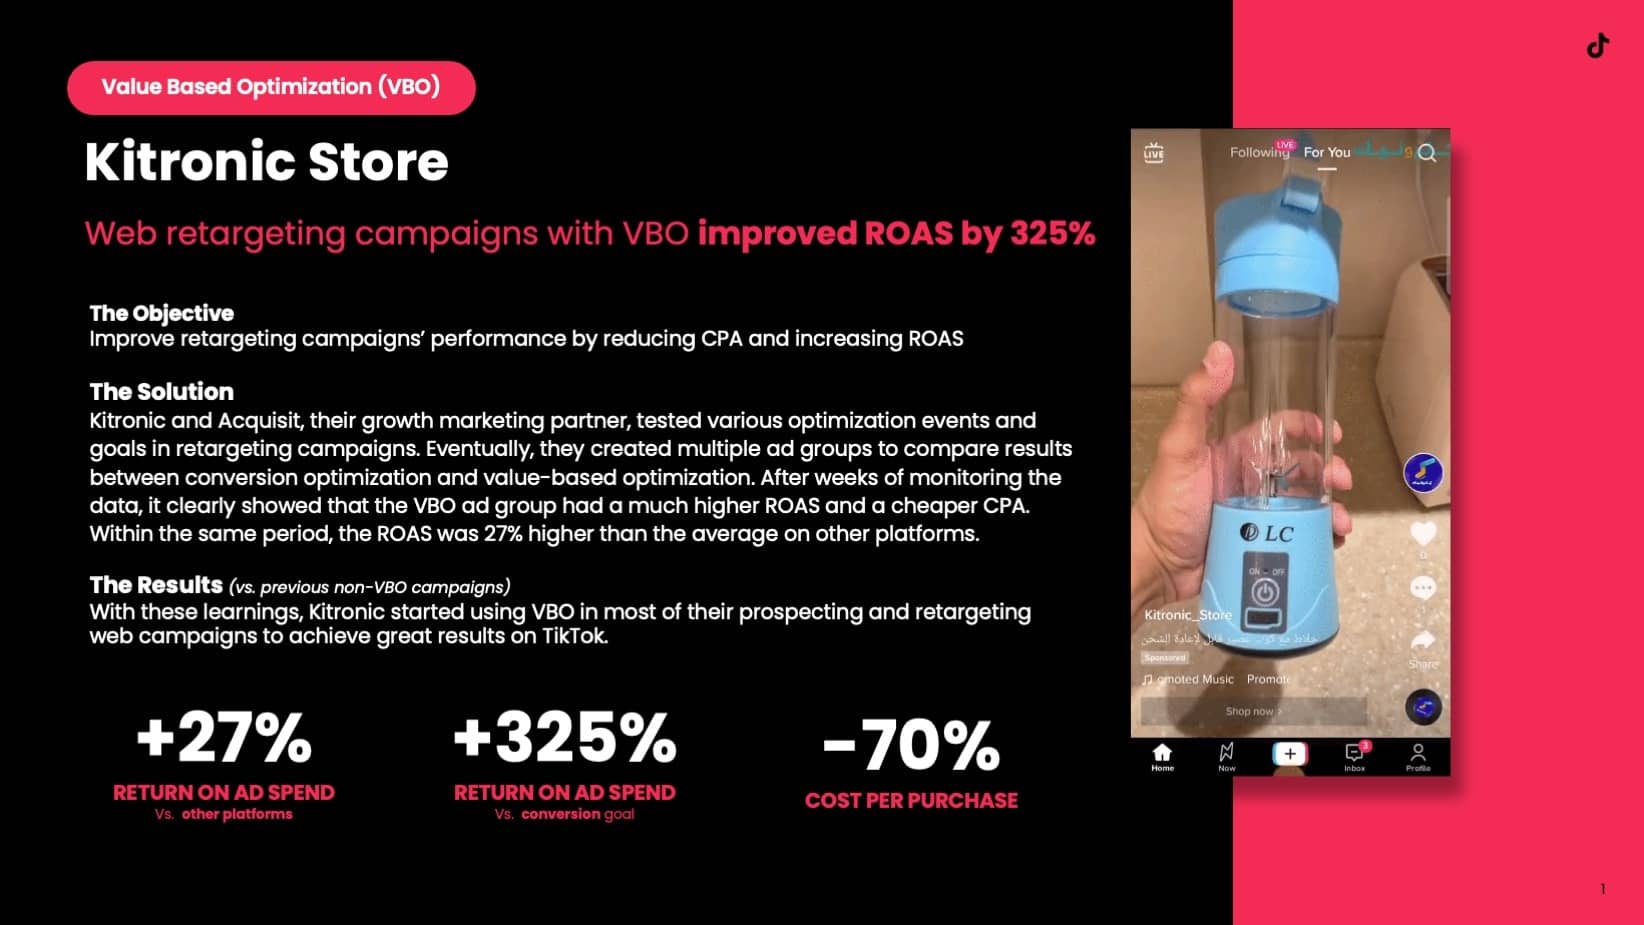 See how Kitronic reduced its CPA on Tiktok by 70% 